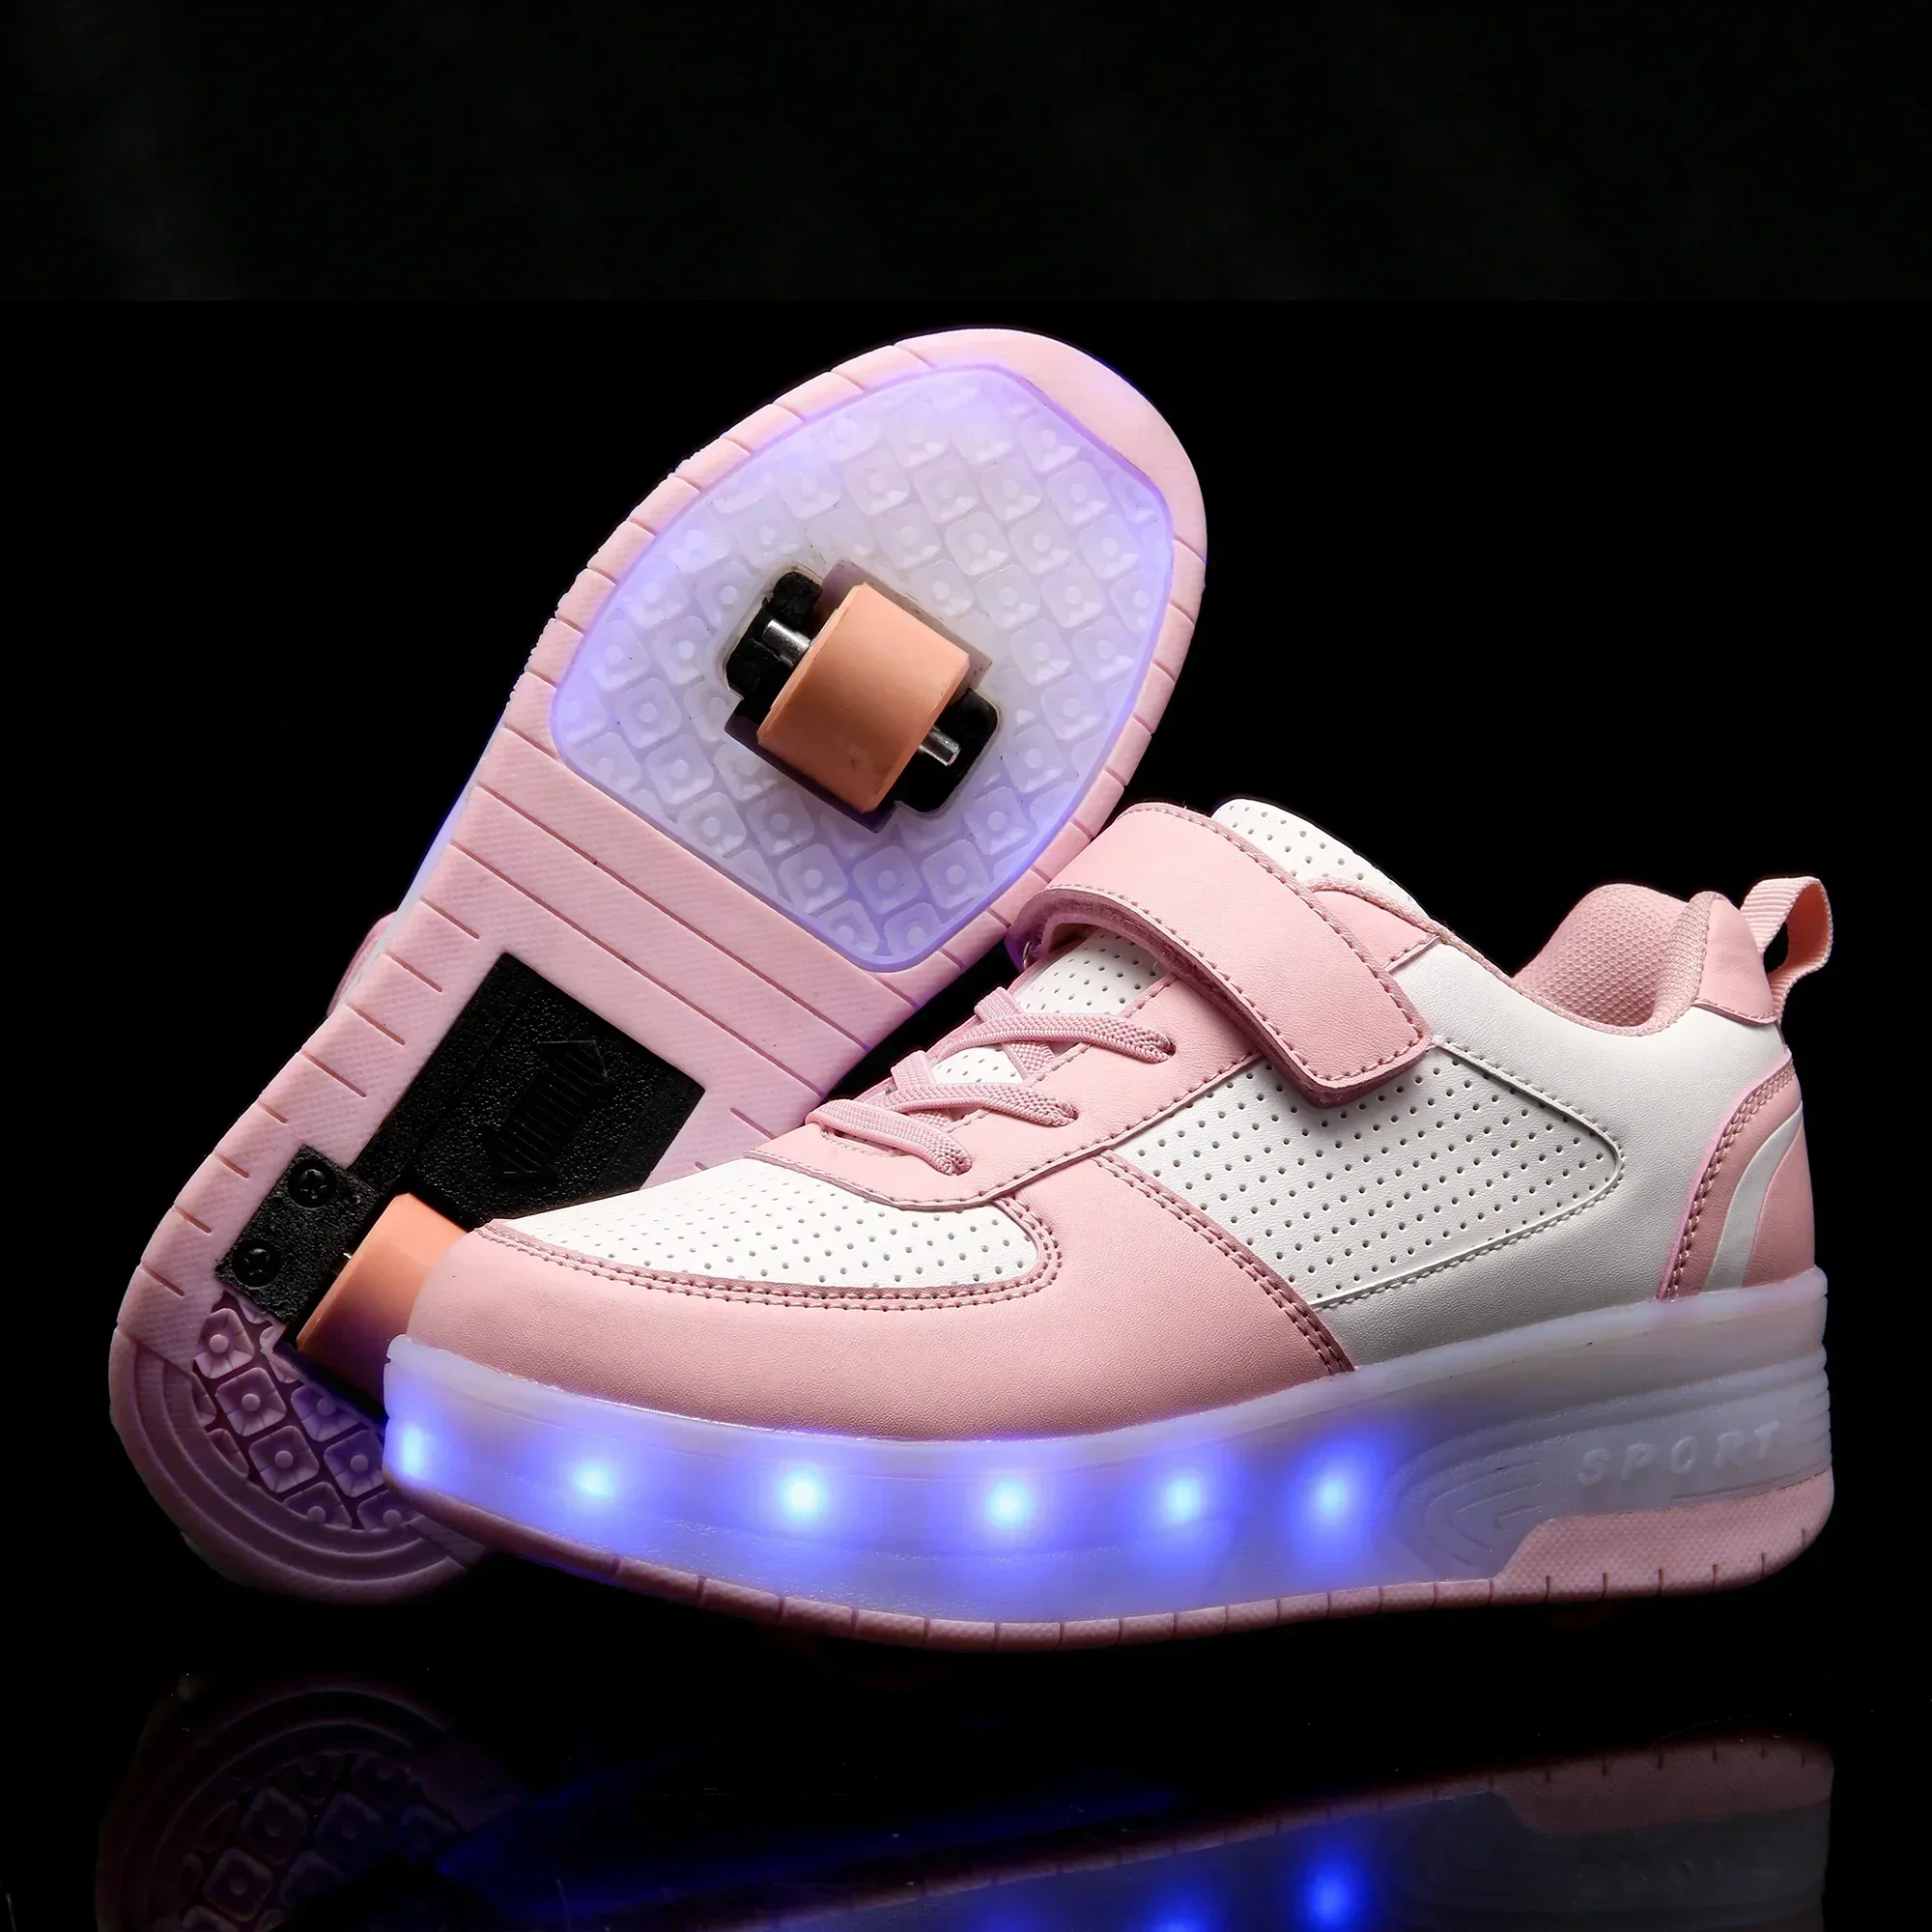 

Children’s Two Wheels Luminous Glowing Sneakers Heels Pink Led Light Roller Skate Shoes Kids Led Shoes Boys Girls USB Charging